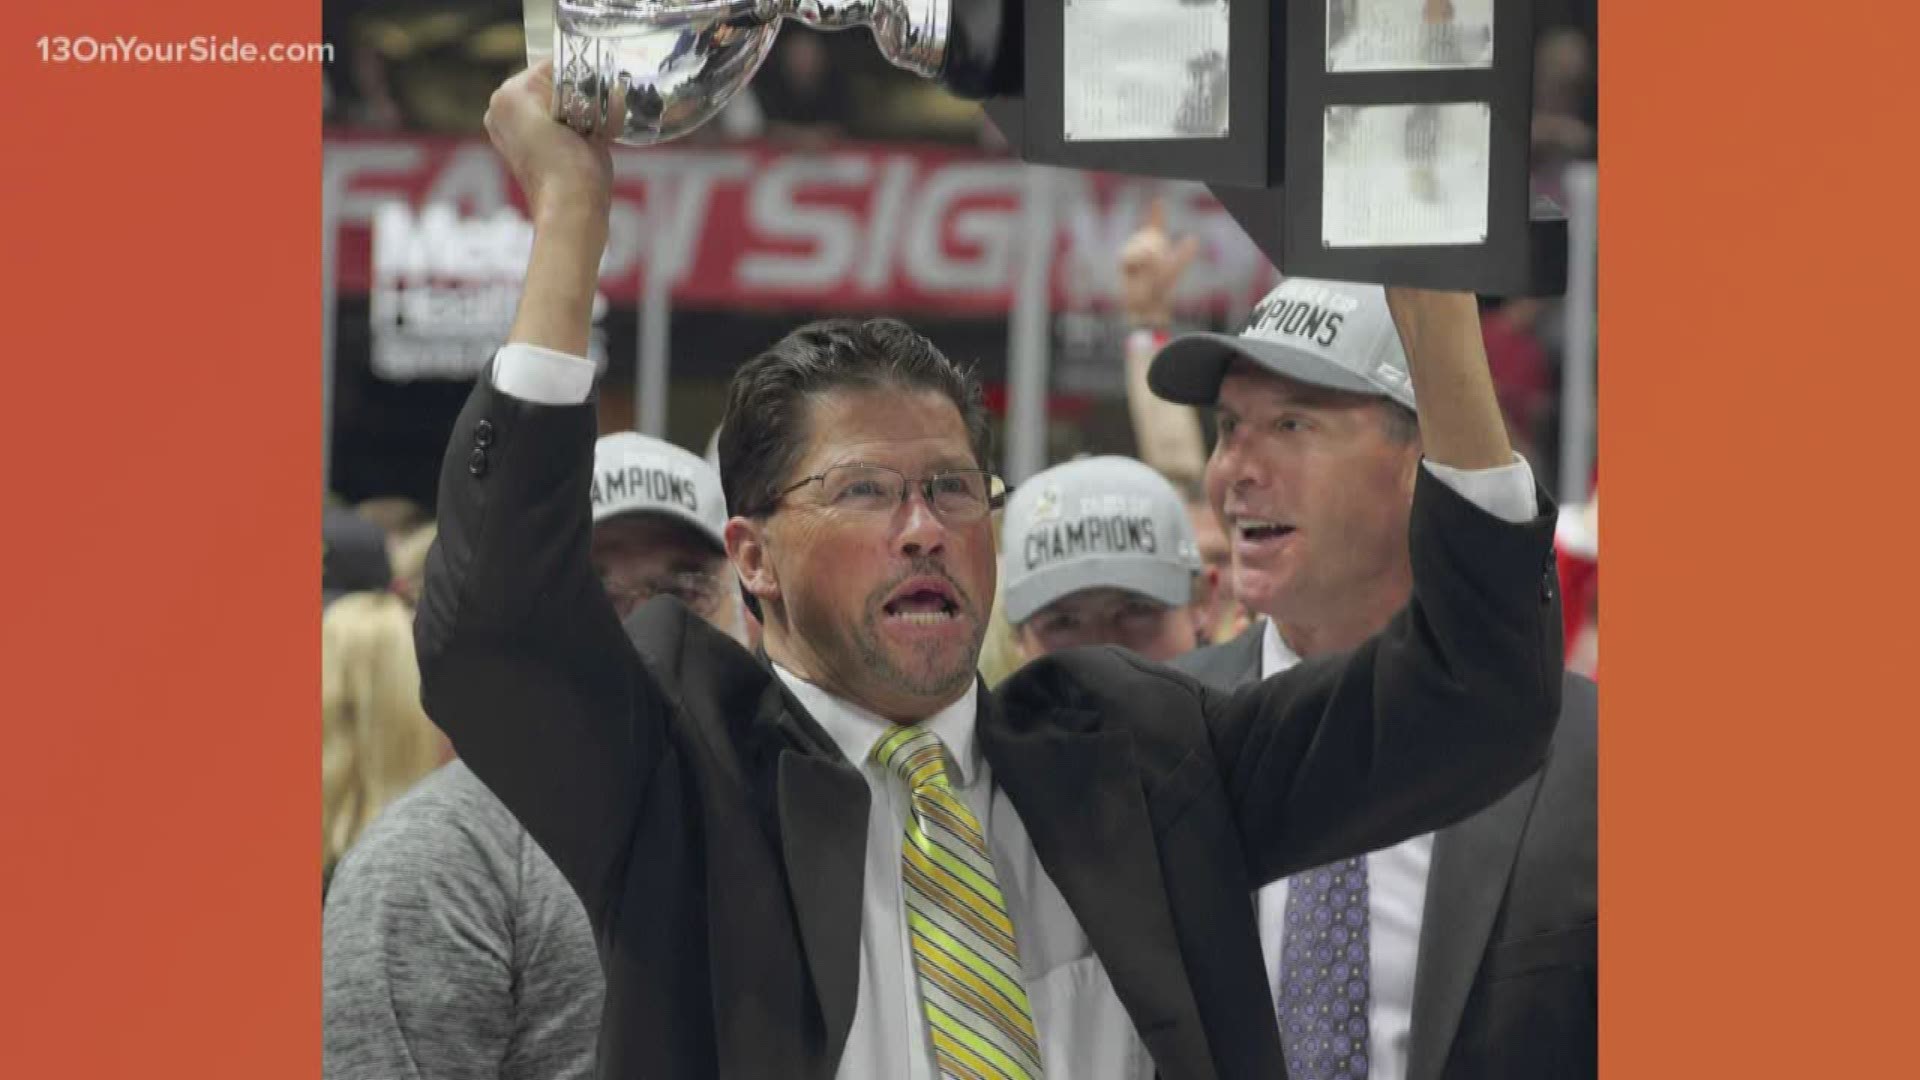 The Grand Rapids Griffins are mourning the loss of the team's video coach, Bill LeRoy. He passed away Friday in Canada.